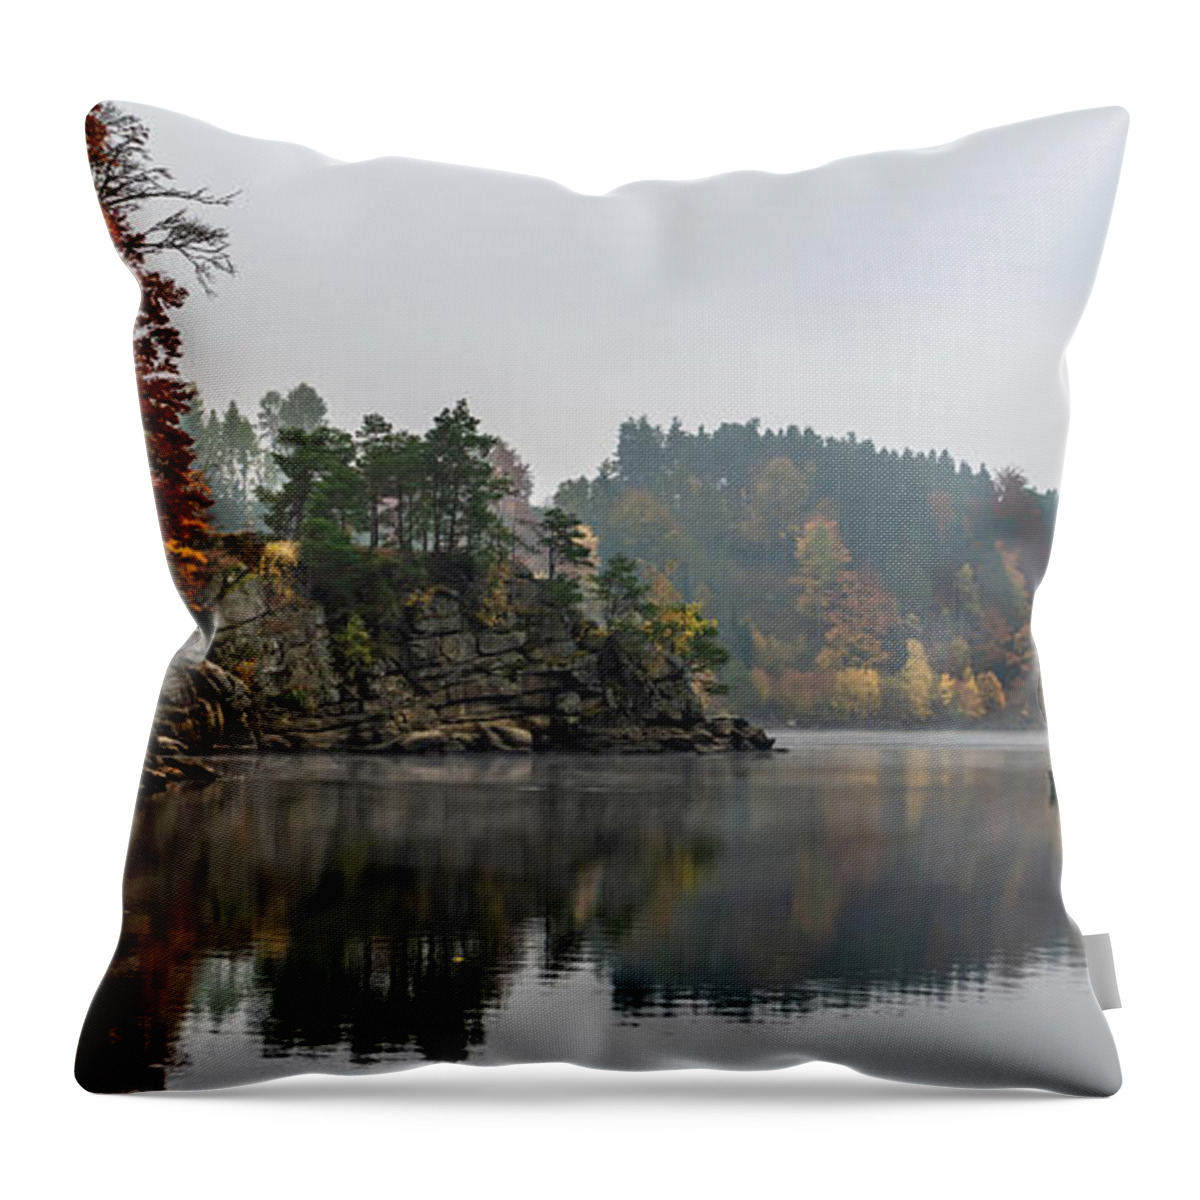 Austria Throw Pillow featuring the photograph Foggy Landscape With Fishermans Boat On Calm Lake And Autumnal Forest At Lake Ottenstein In Austria by Andreas Berthold